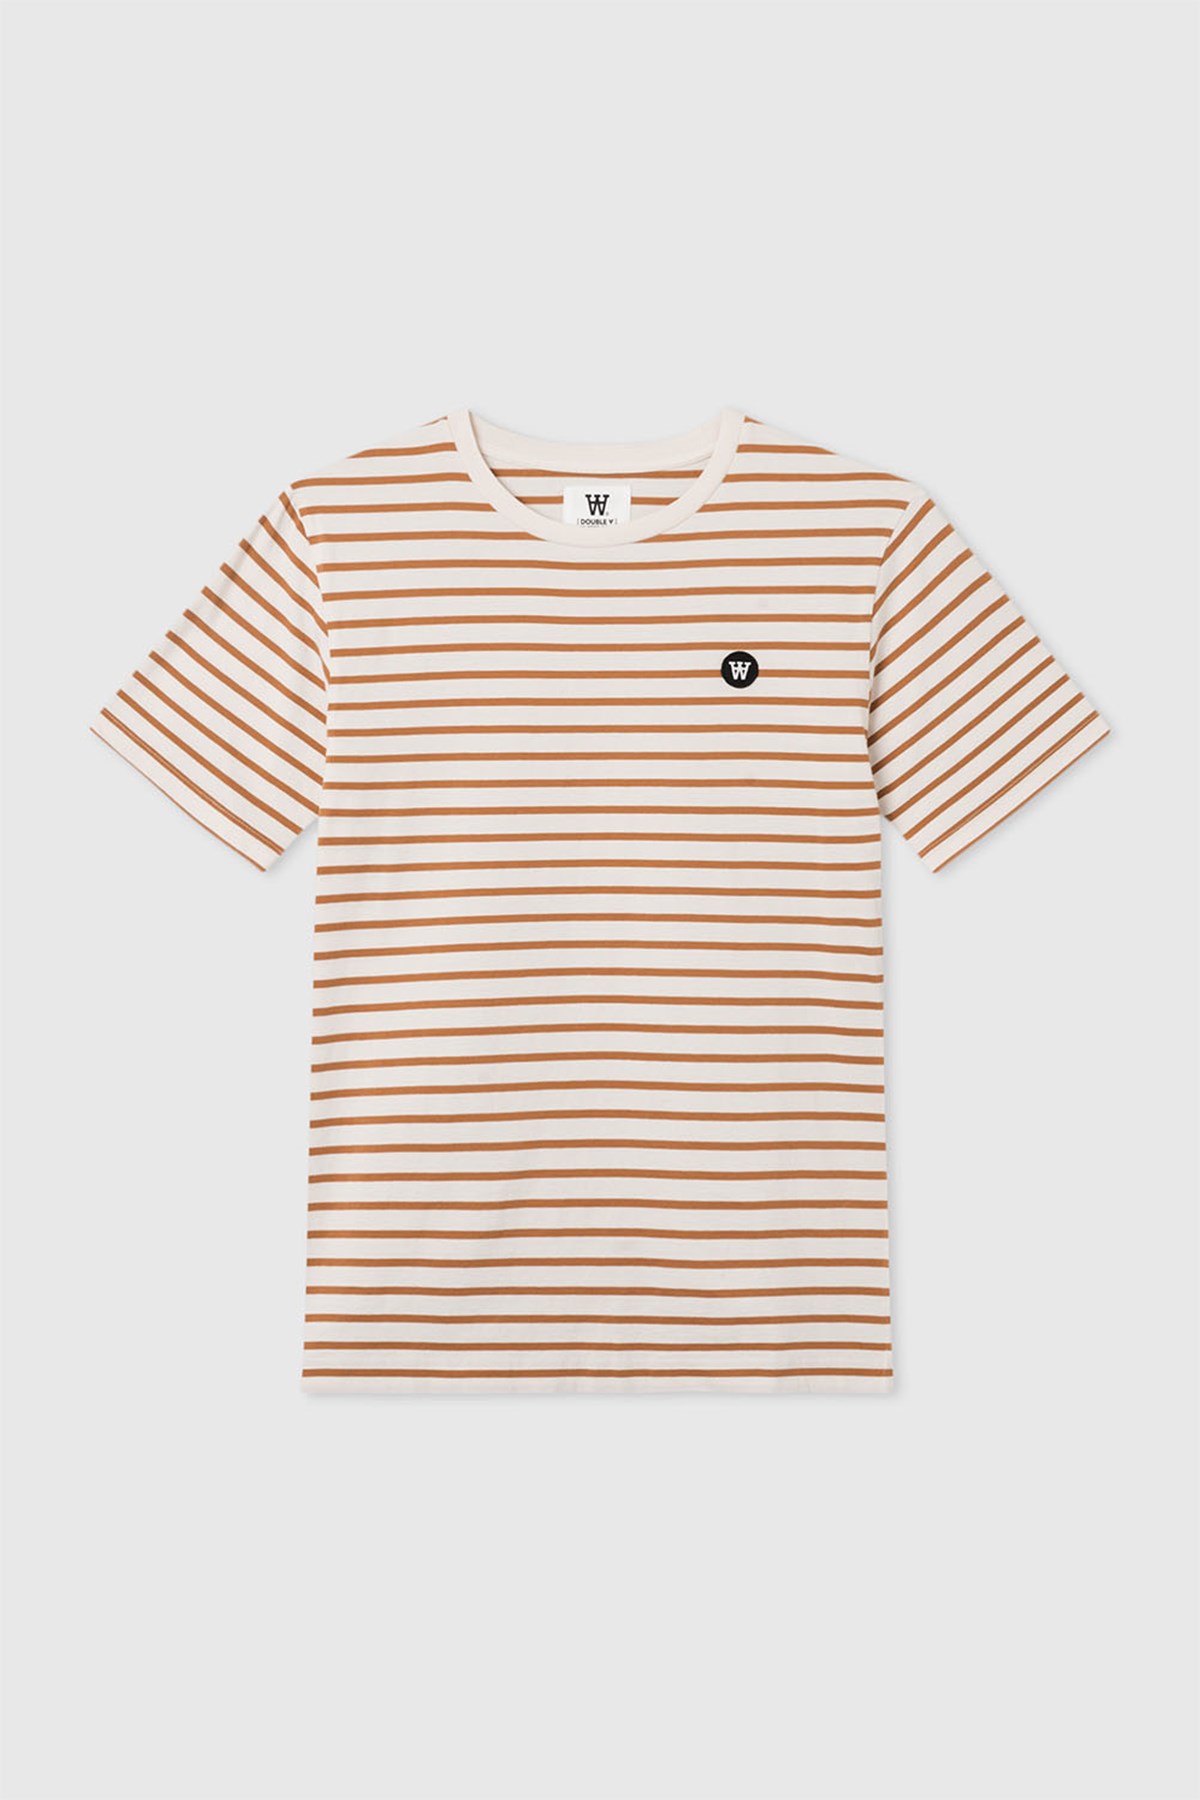 Double A by Wood Wood Ace T-shirt Off-white/camel stripes | WoodWood.com